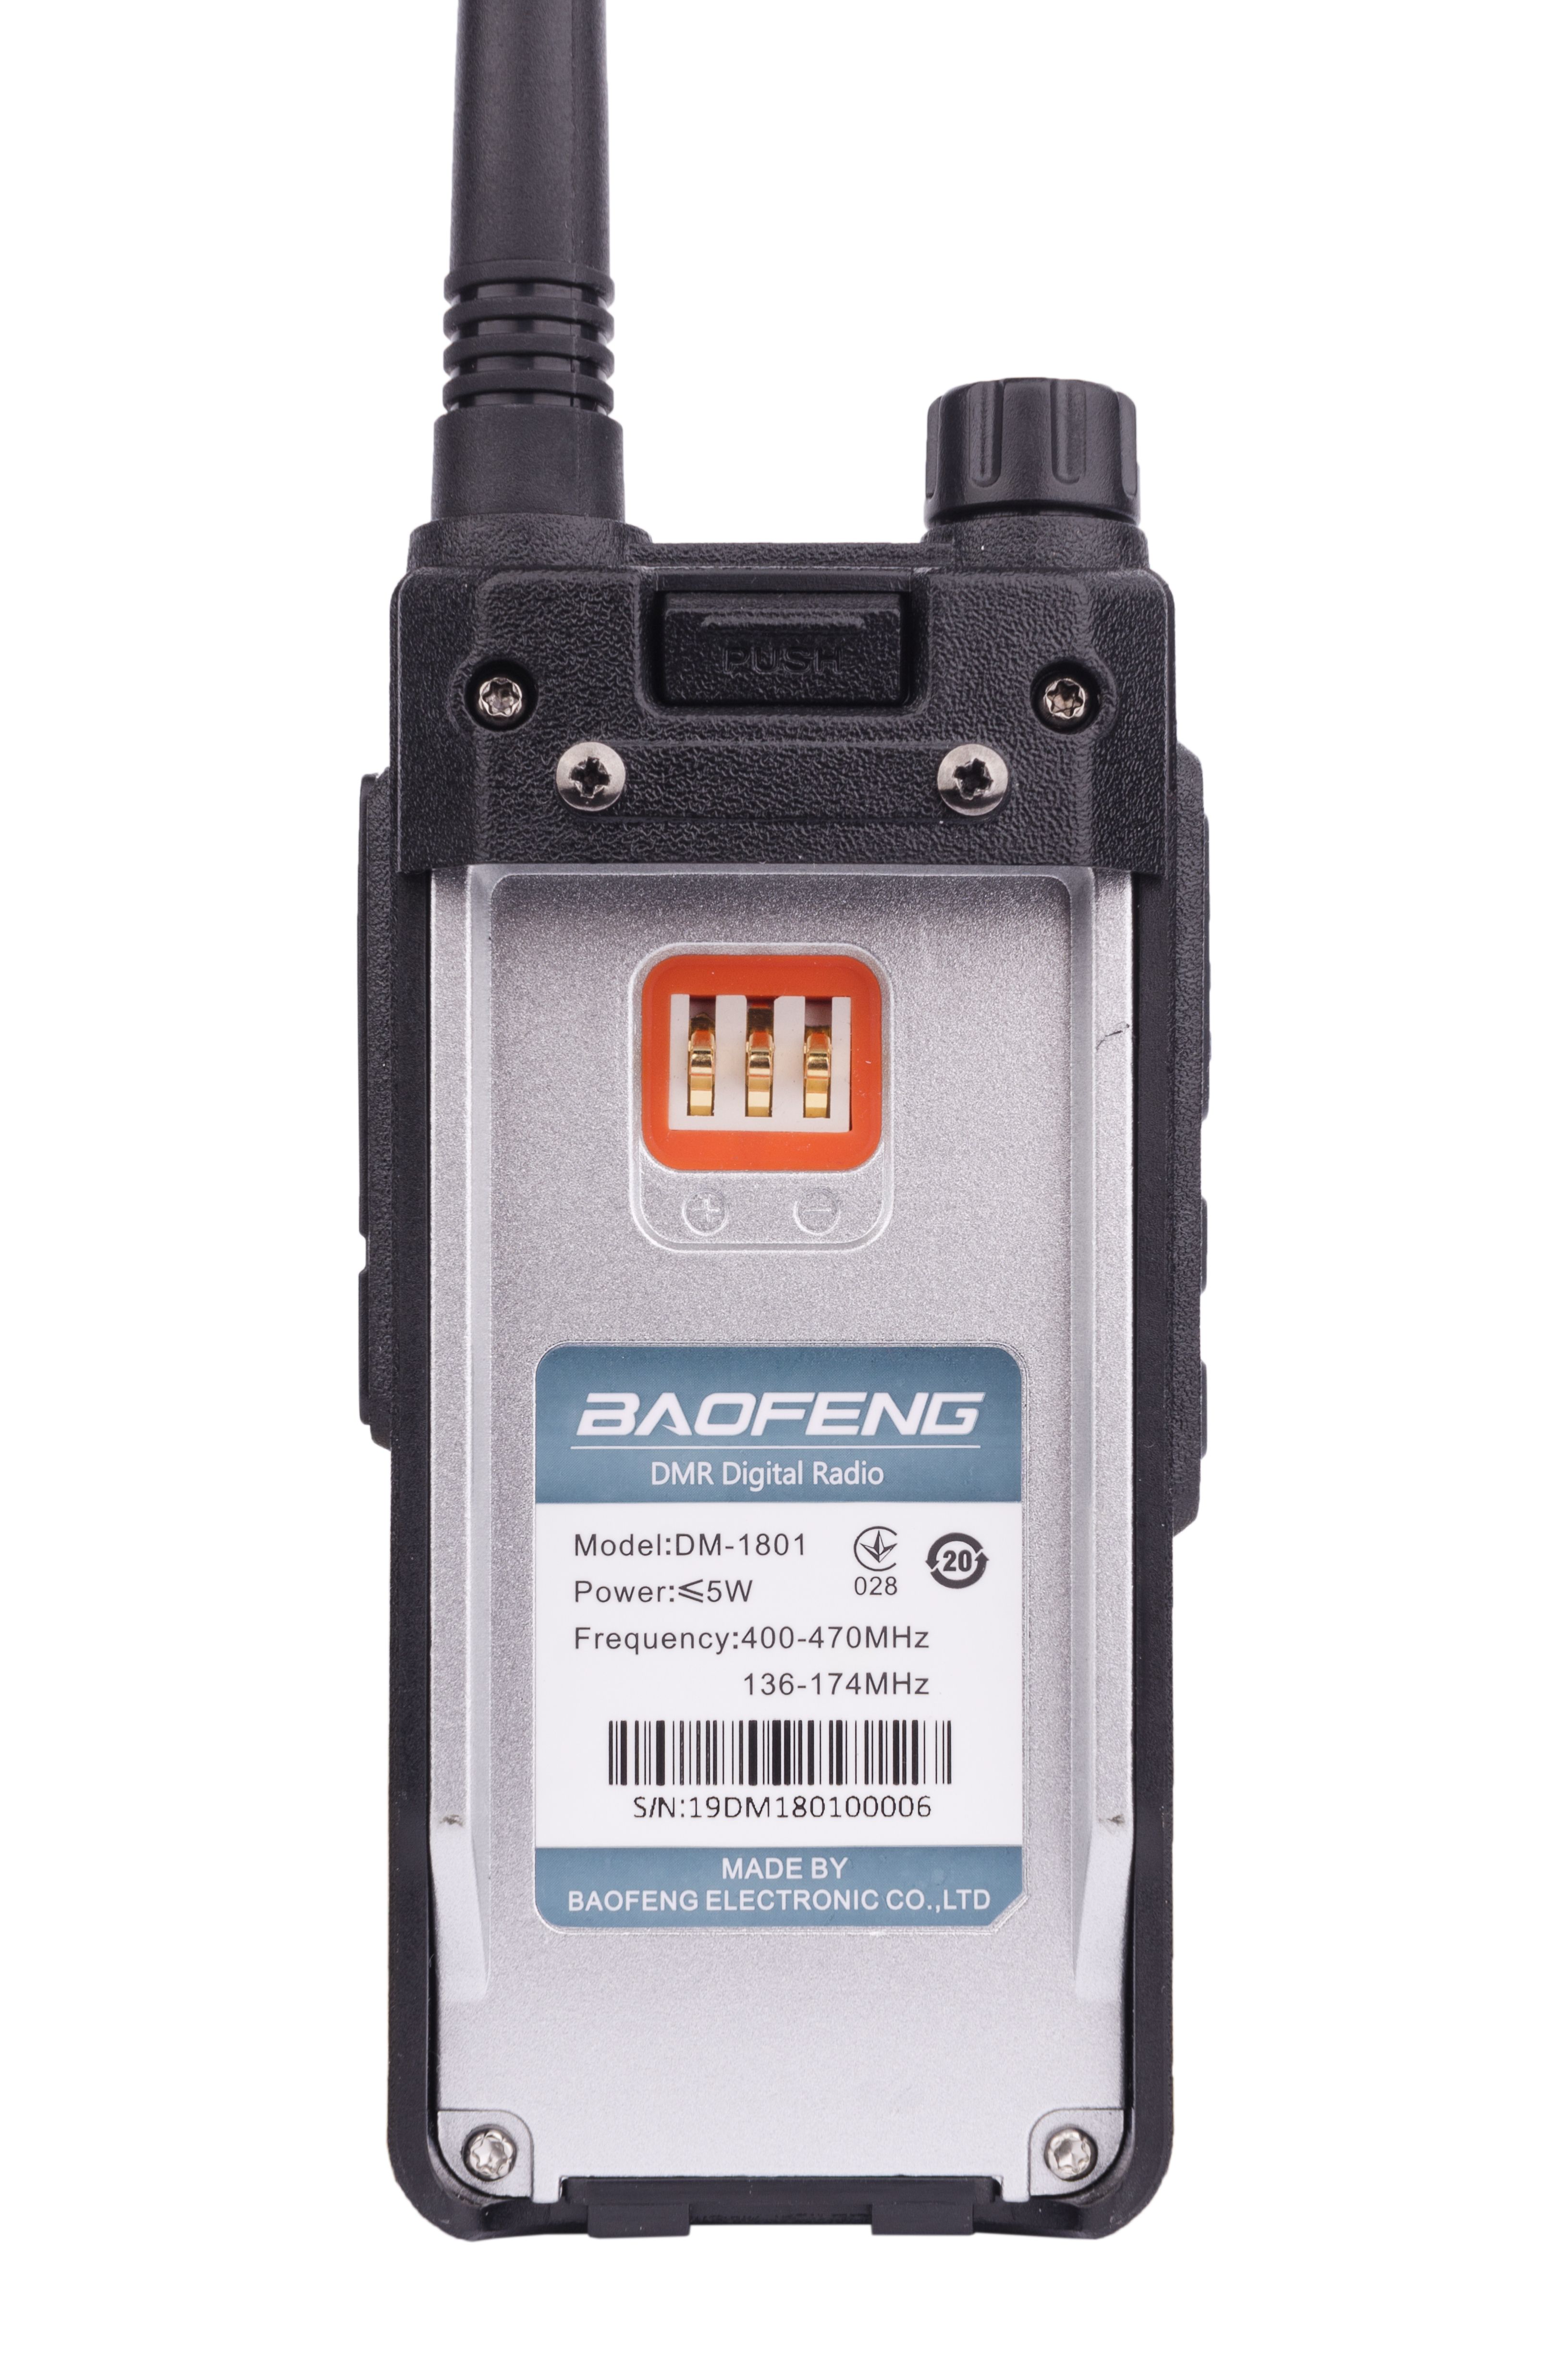 Baofeng DR-1801 DMR Radio with AES-256